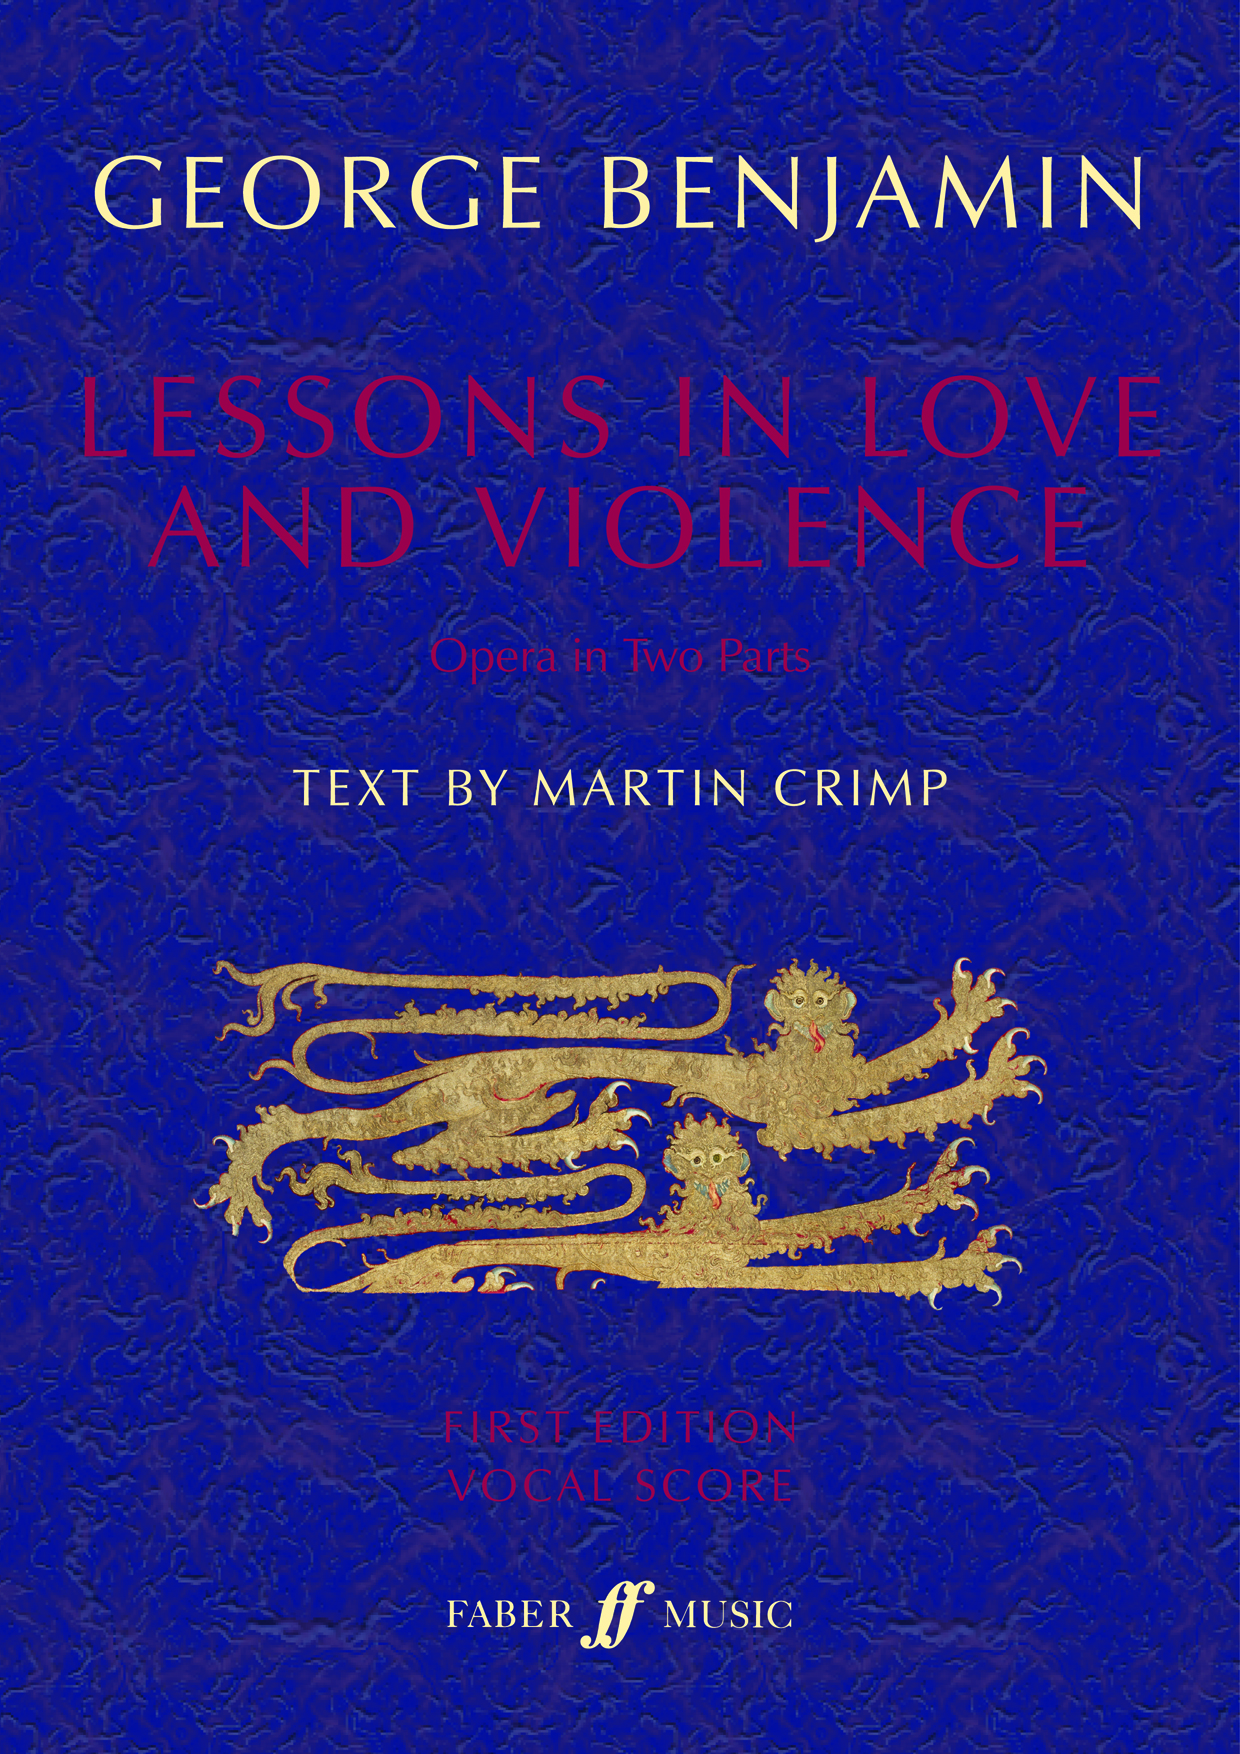 Lessons in Love and Violence (First Edition) (BENJAMIN GEORGE)